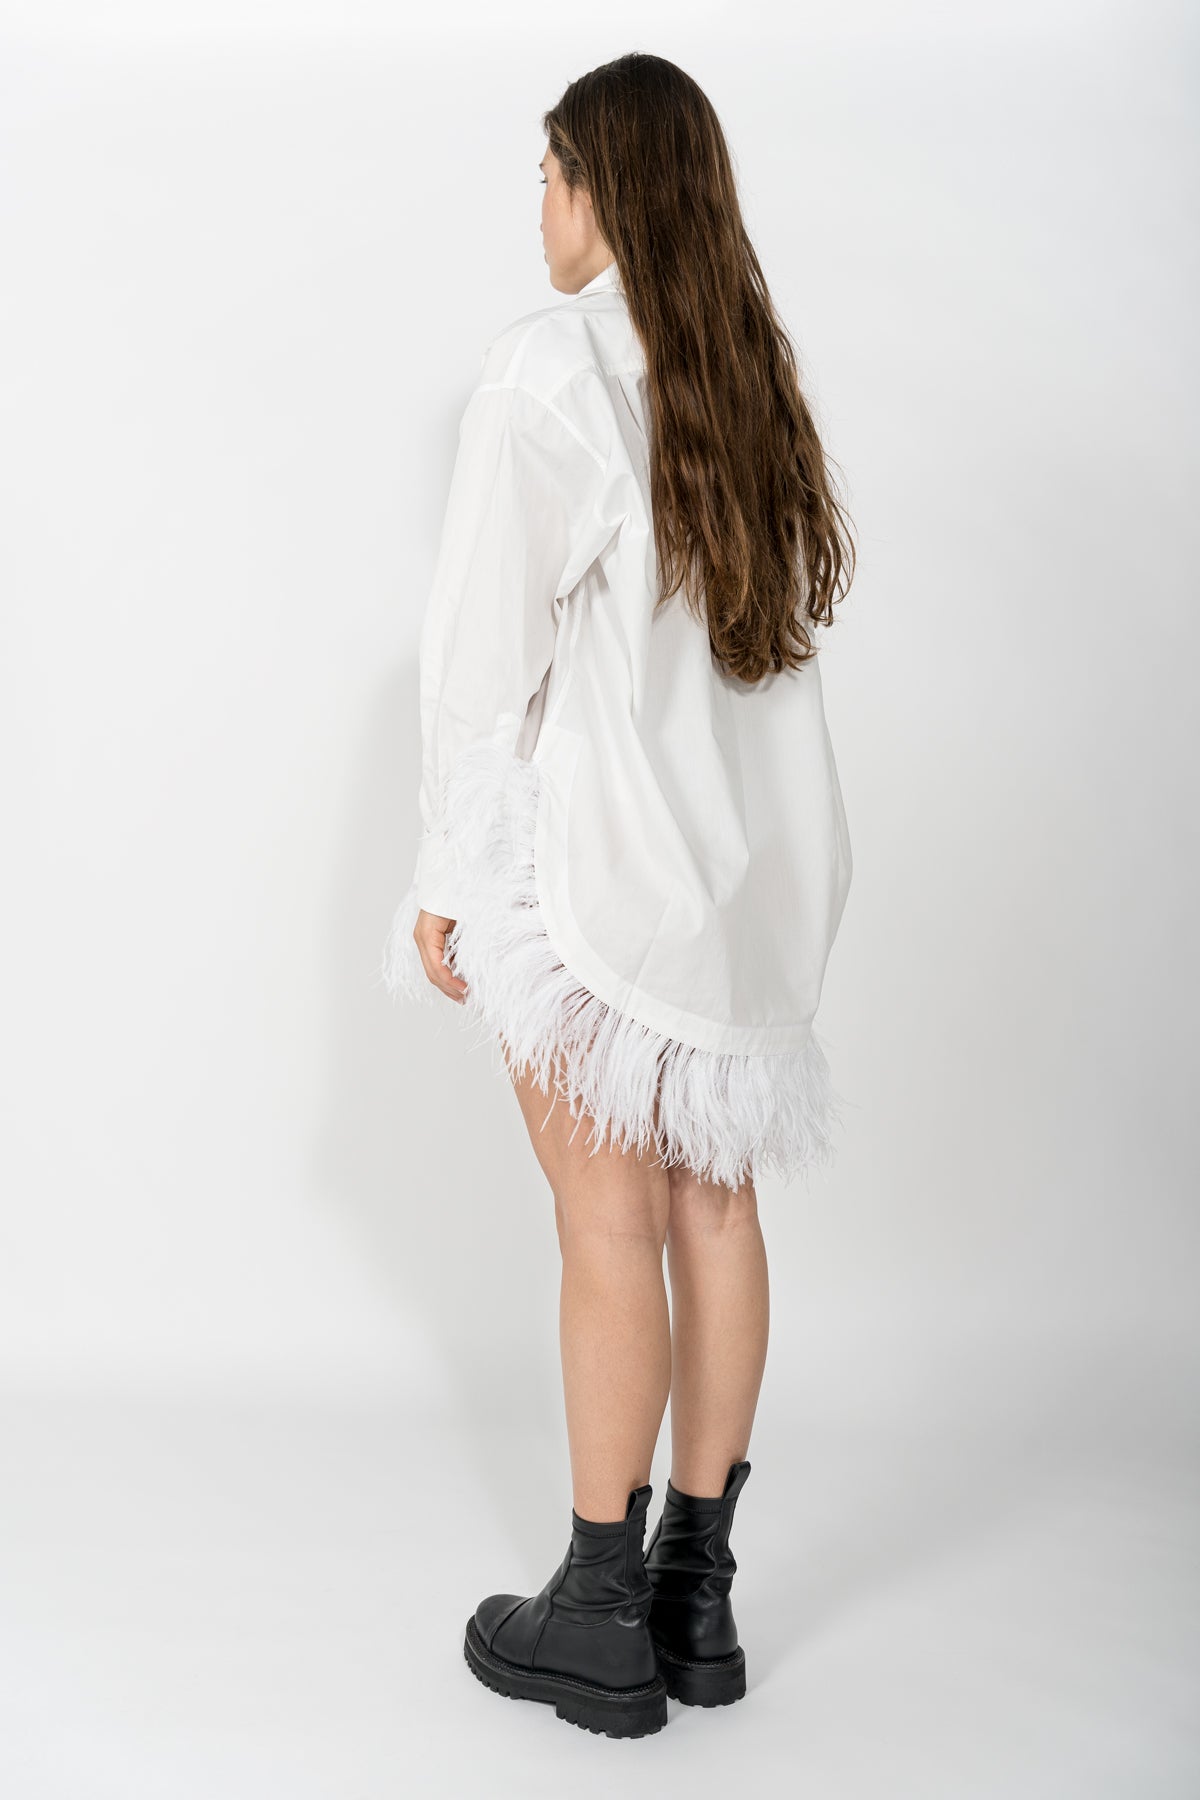 WHITE XXL SHIRT WITH FEATHERS MARQUES ALMEIDA